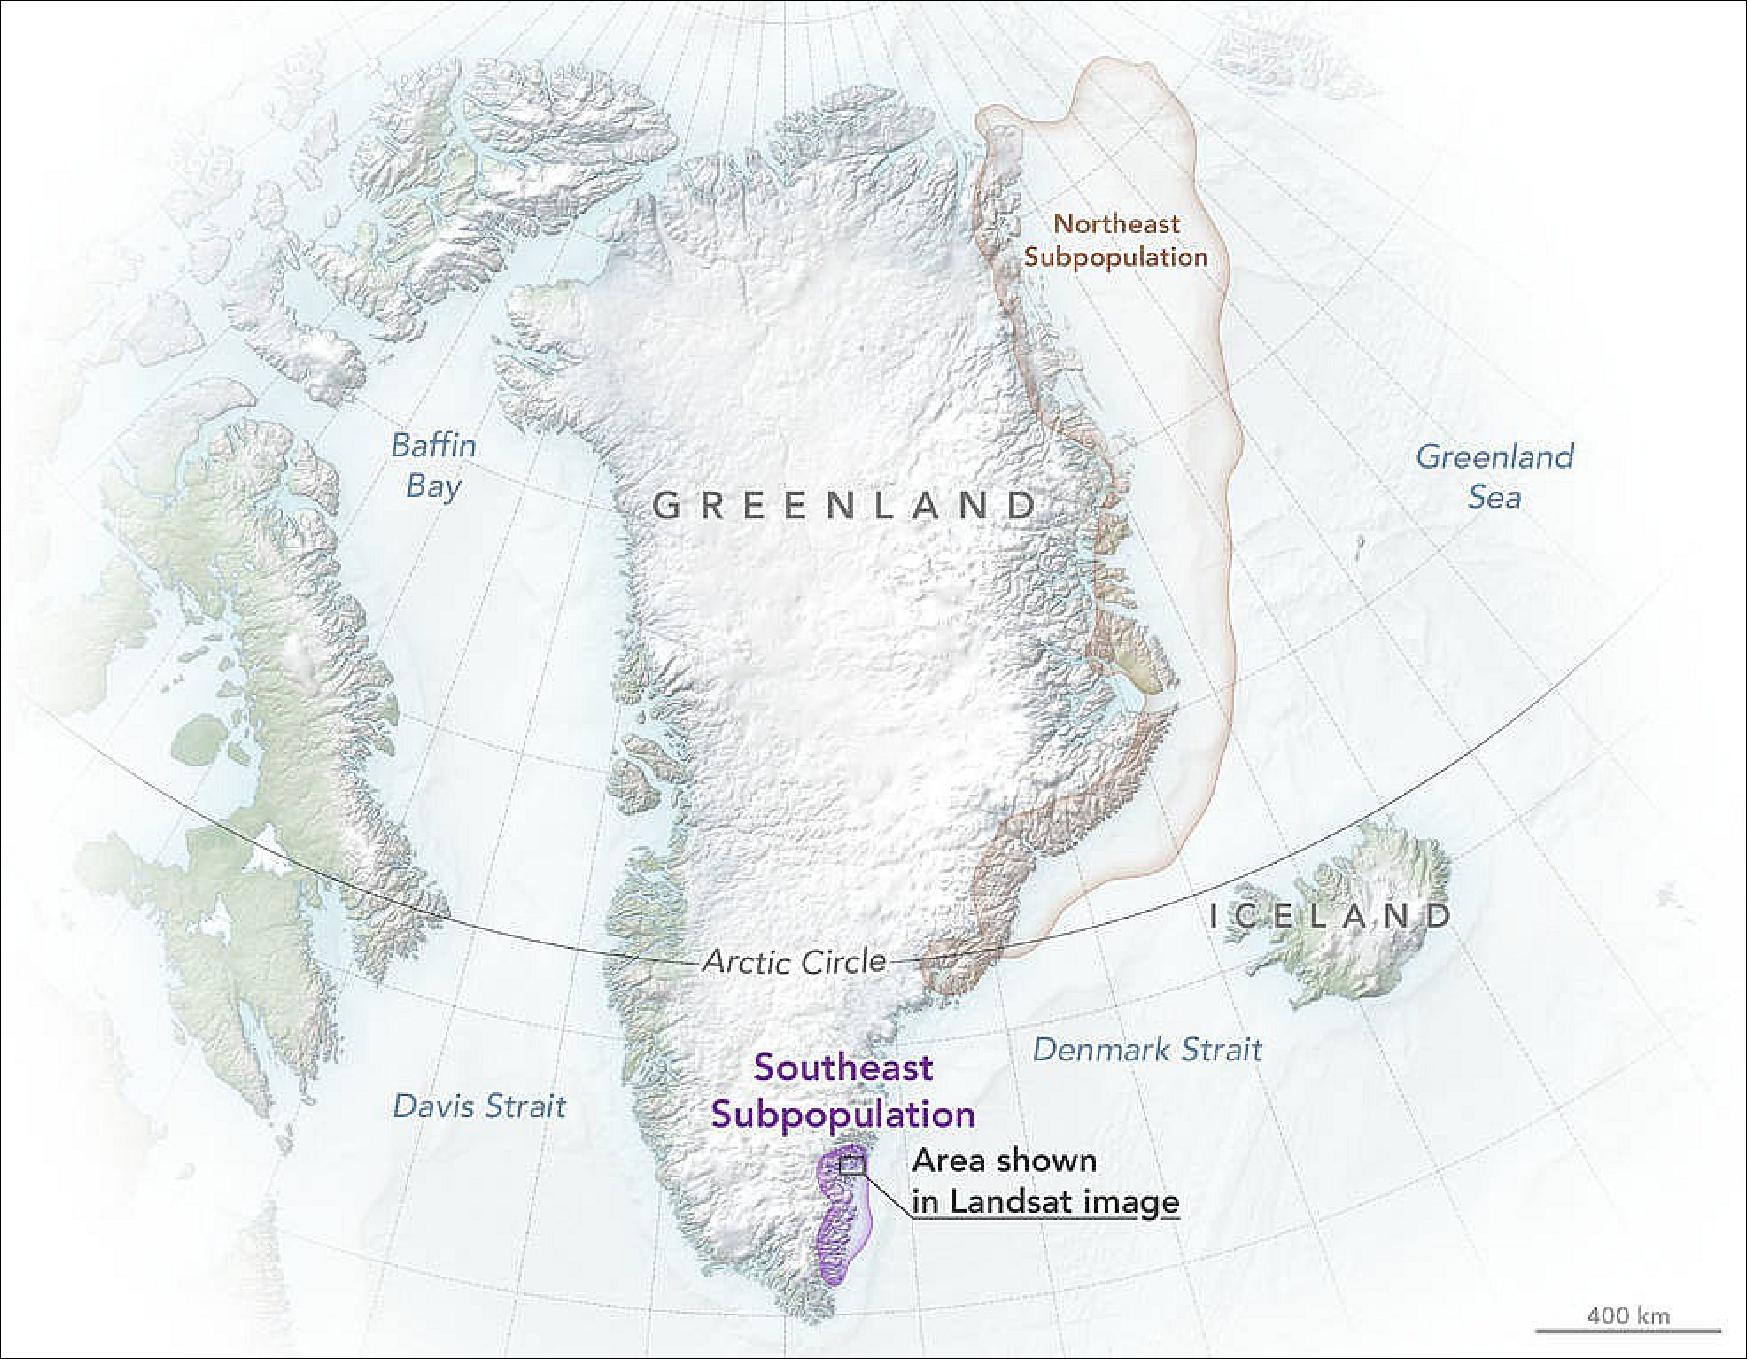 Figure 11: Satellite tracking shows that the Southeast and Northeast polar bear populations are distinct and have different behaviors. The tan area shows that Northeast Greenland polar bears travel across extensive sea ice to hunt. The purple area shows that Southeast Greenland polar bears have more limited movements inside their home fjords or neighboring fjords (image credits: NASA's Earth Observatory images by Joshua Stevens, using data from Laidre, K. L., et al. (2022) and Landsat data from the U.S. Geological Survey. Story adapted for NASA Earth Observatory by Kathryn Hansen, based on materials from Hannah Hickey/University of Washington, and Jude Coleman/NASA’s Earth Science News Team)